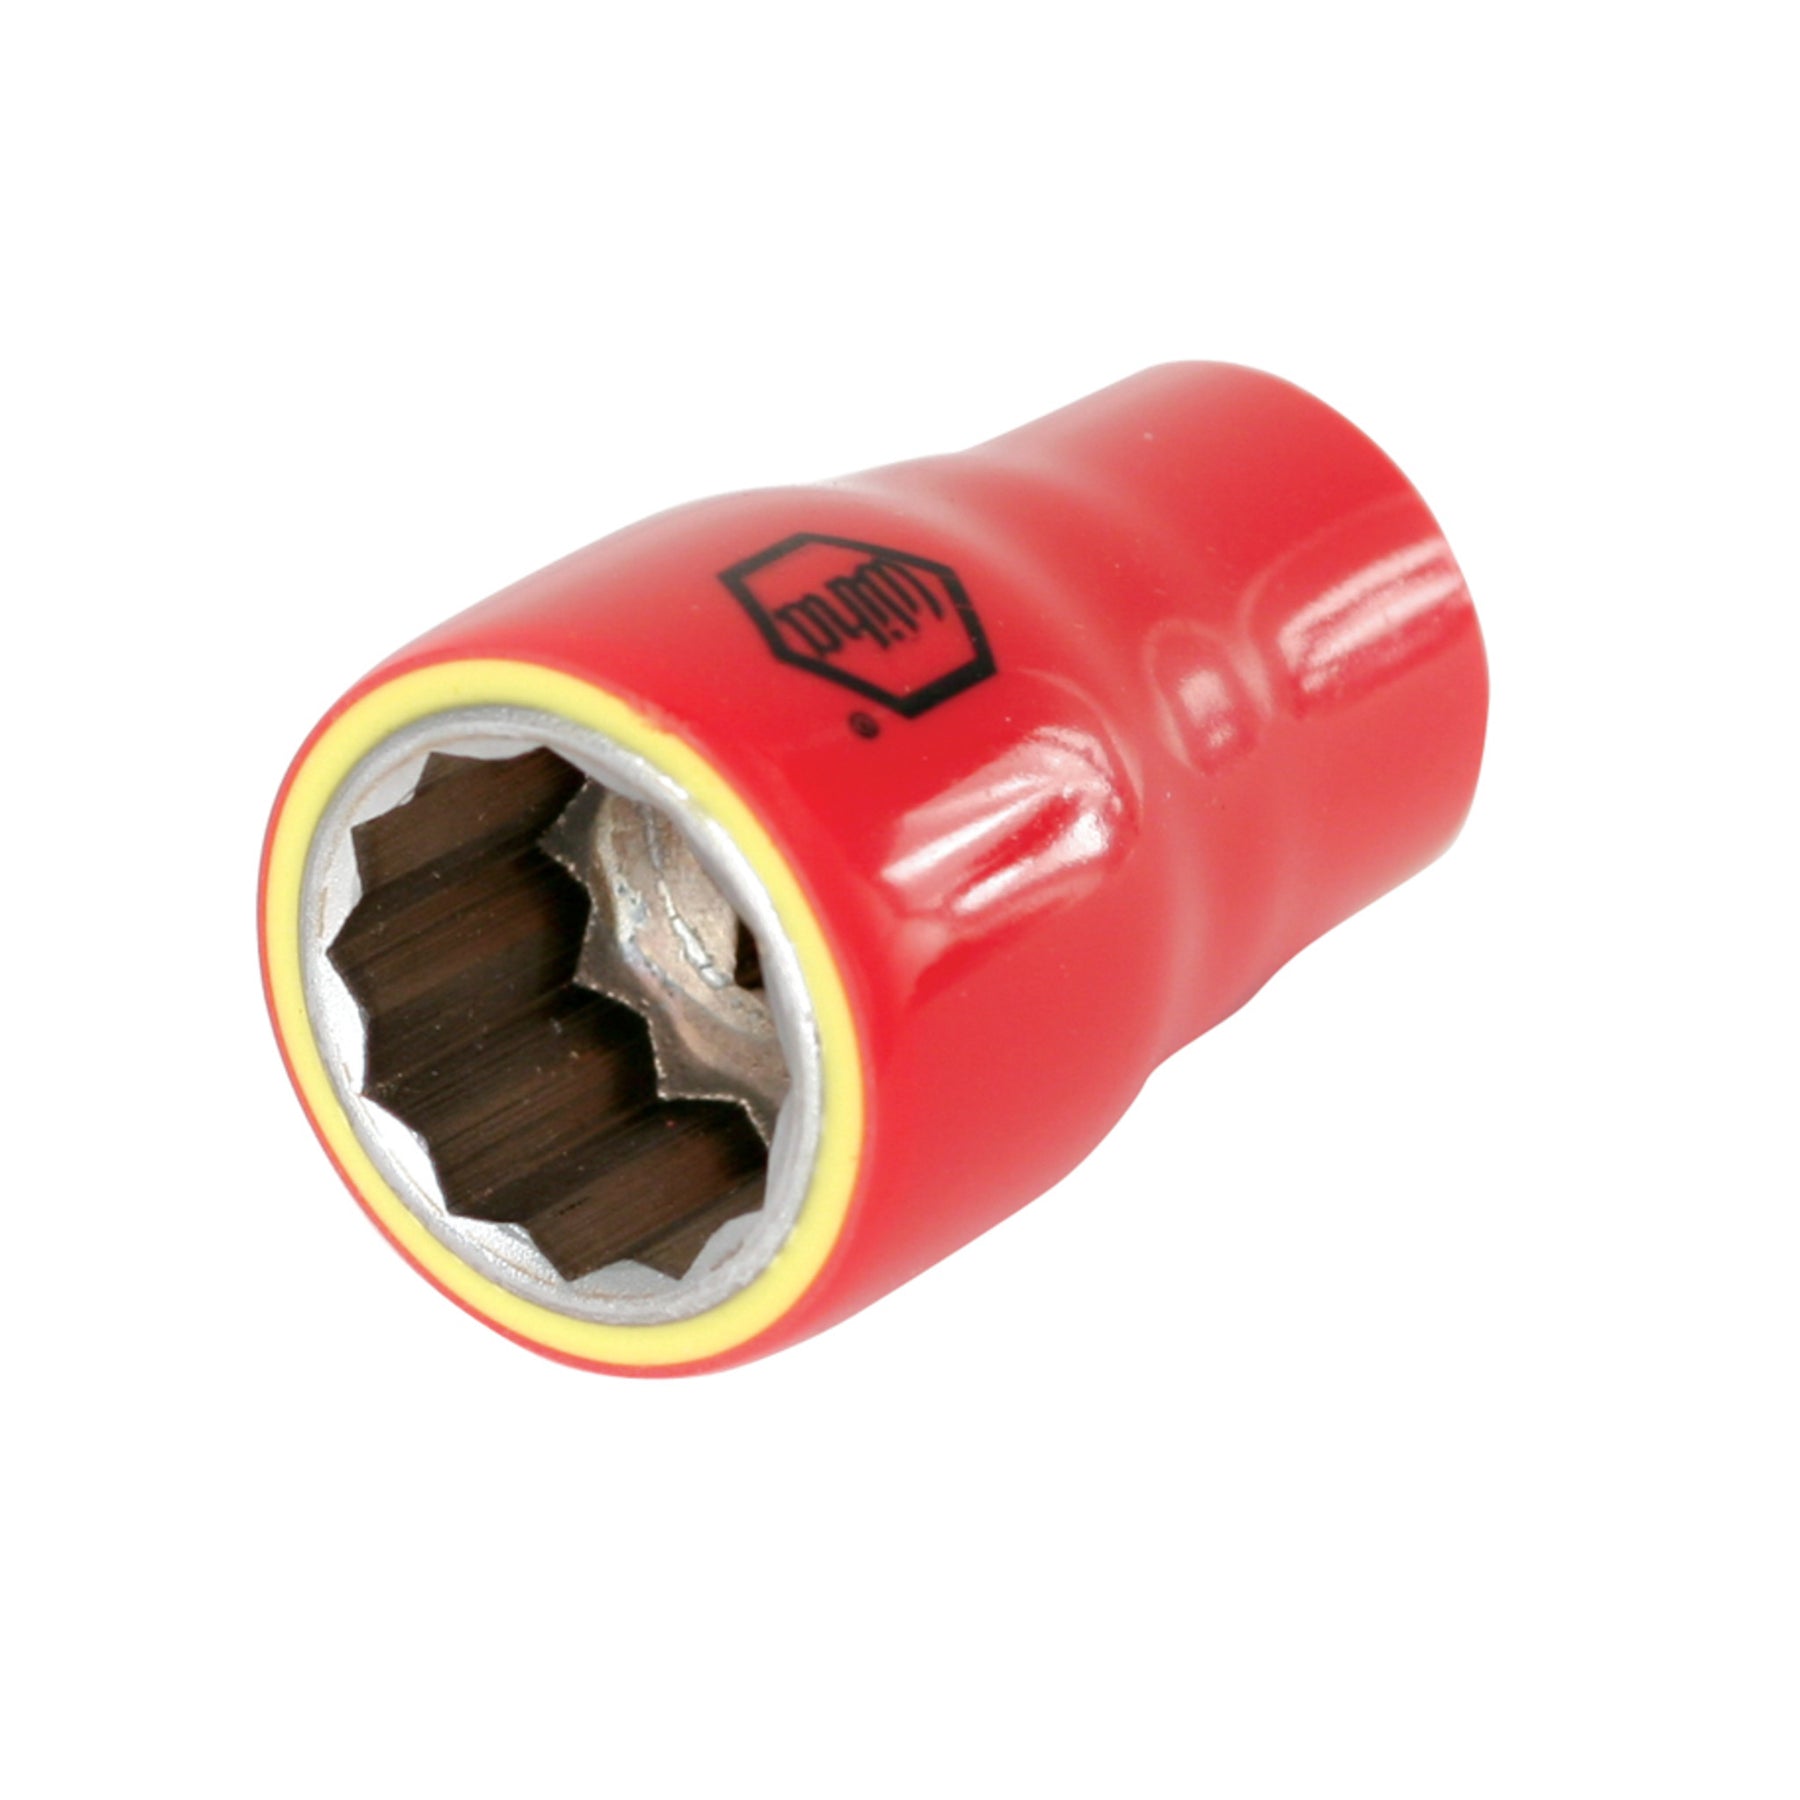 Insulated Socket 1/2" Drive 20mm